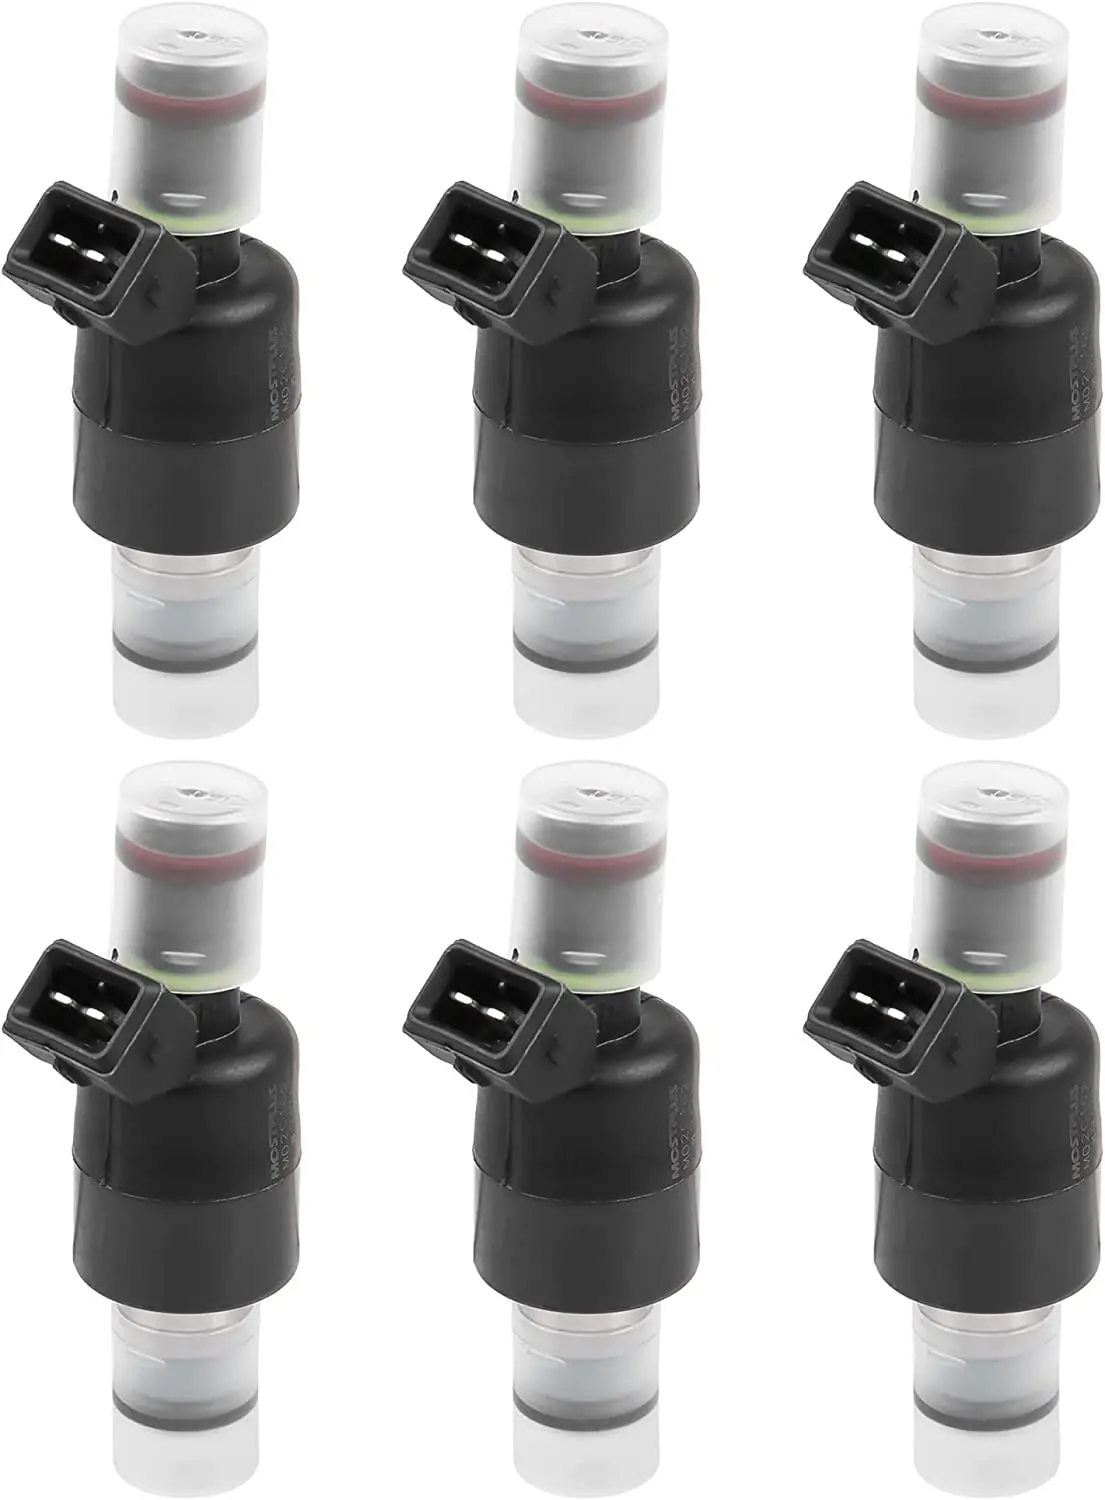 

1piece Fuel Injectors 17089569 Compatible with Chevrolet 2.8 3.1 3.3 1985-1993